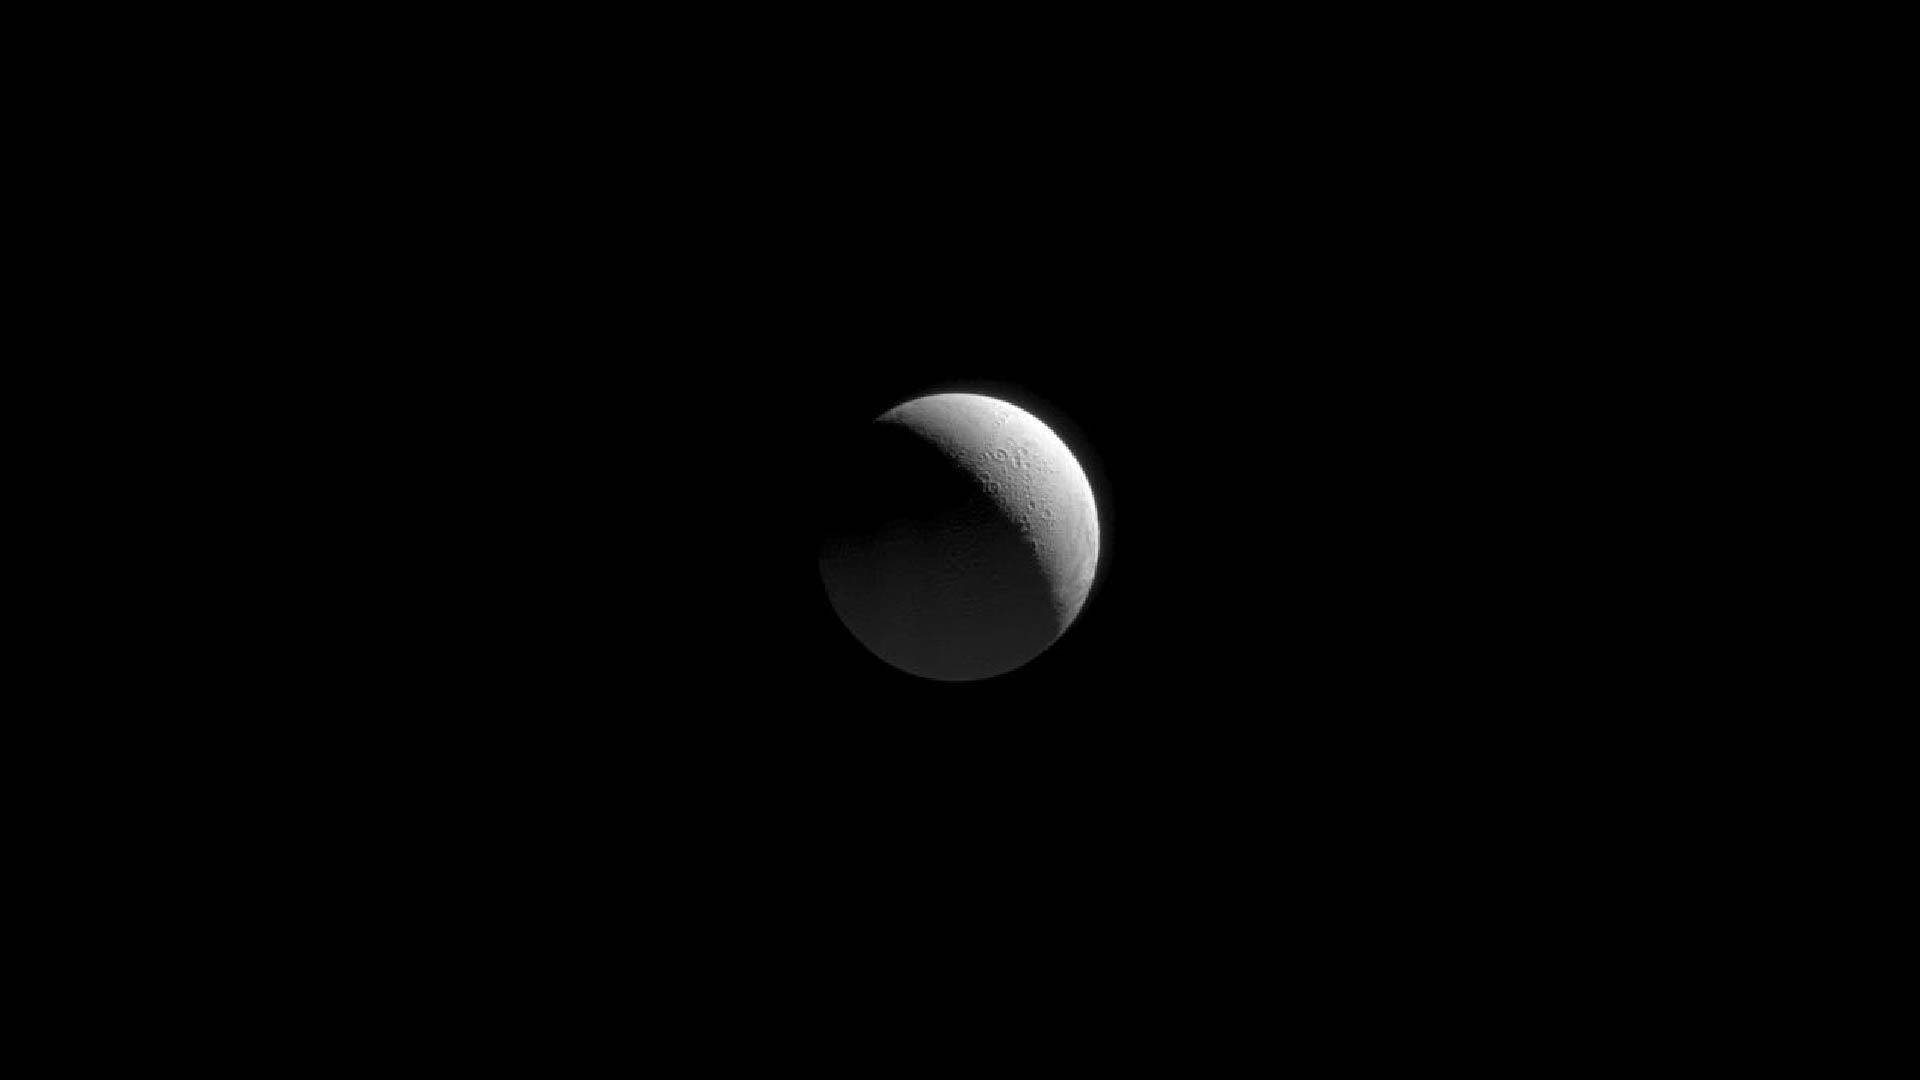 An image of enceladus. It is white and cratered and mostly in shadow.